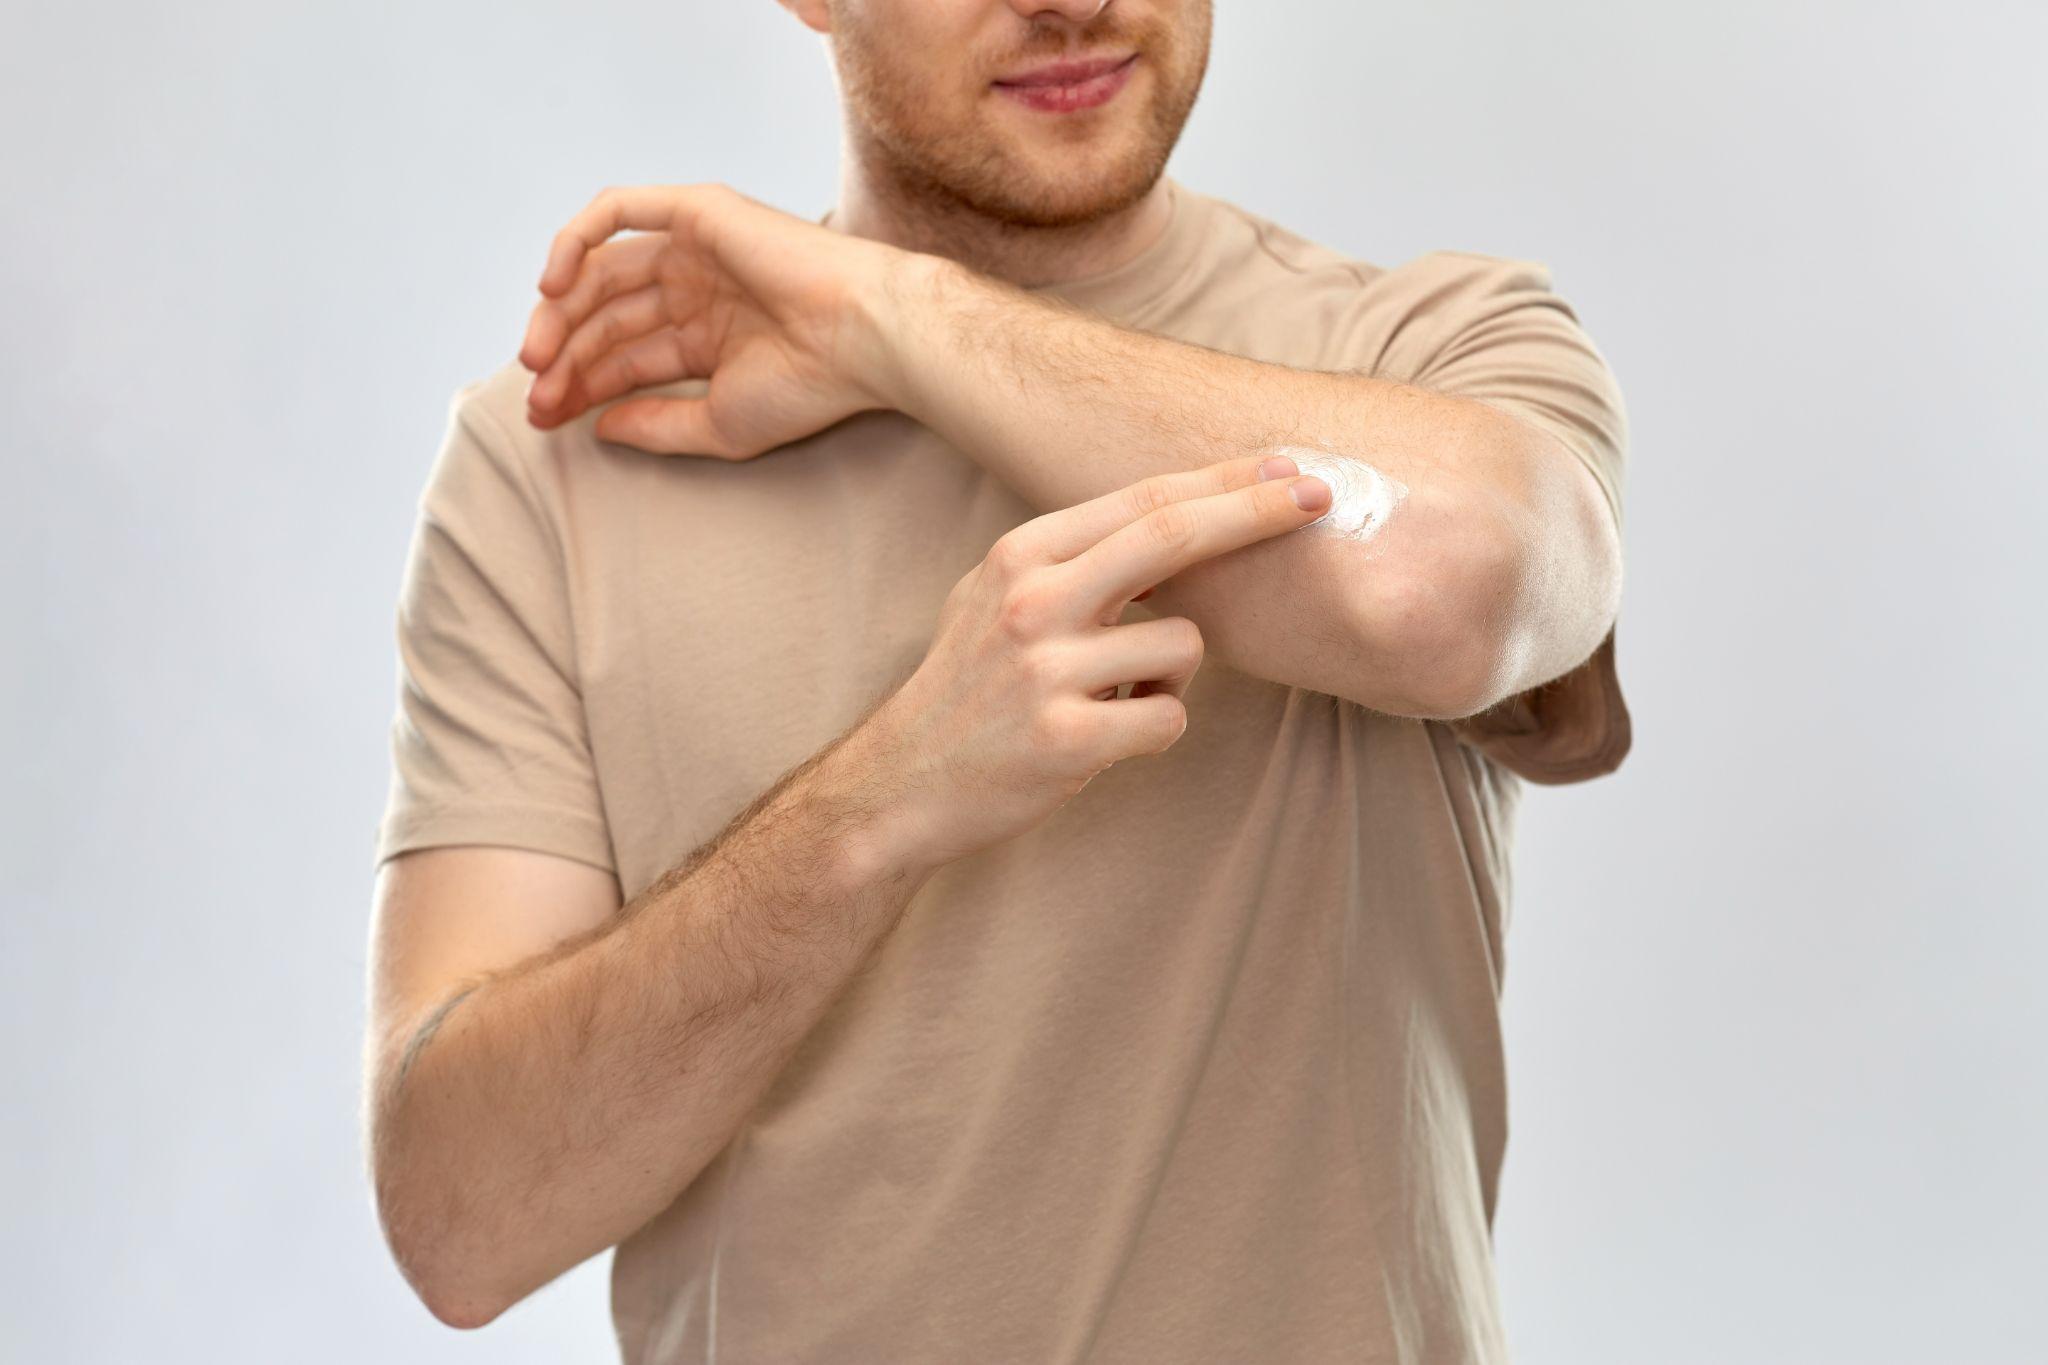 health problem and people concept - young man applying pain medication or moisturizing cream to his elbow